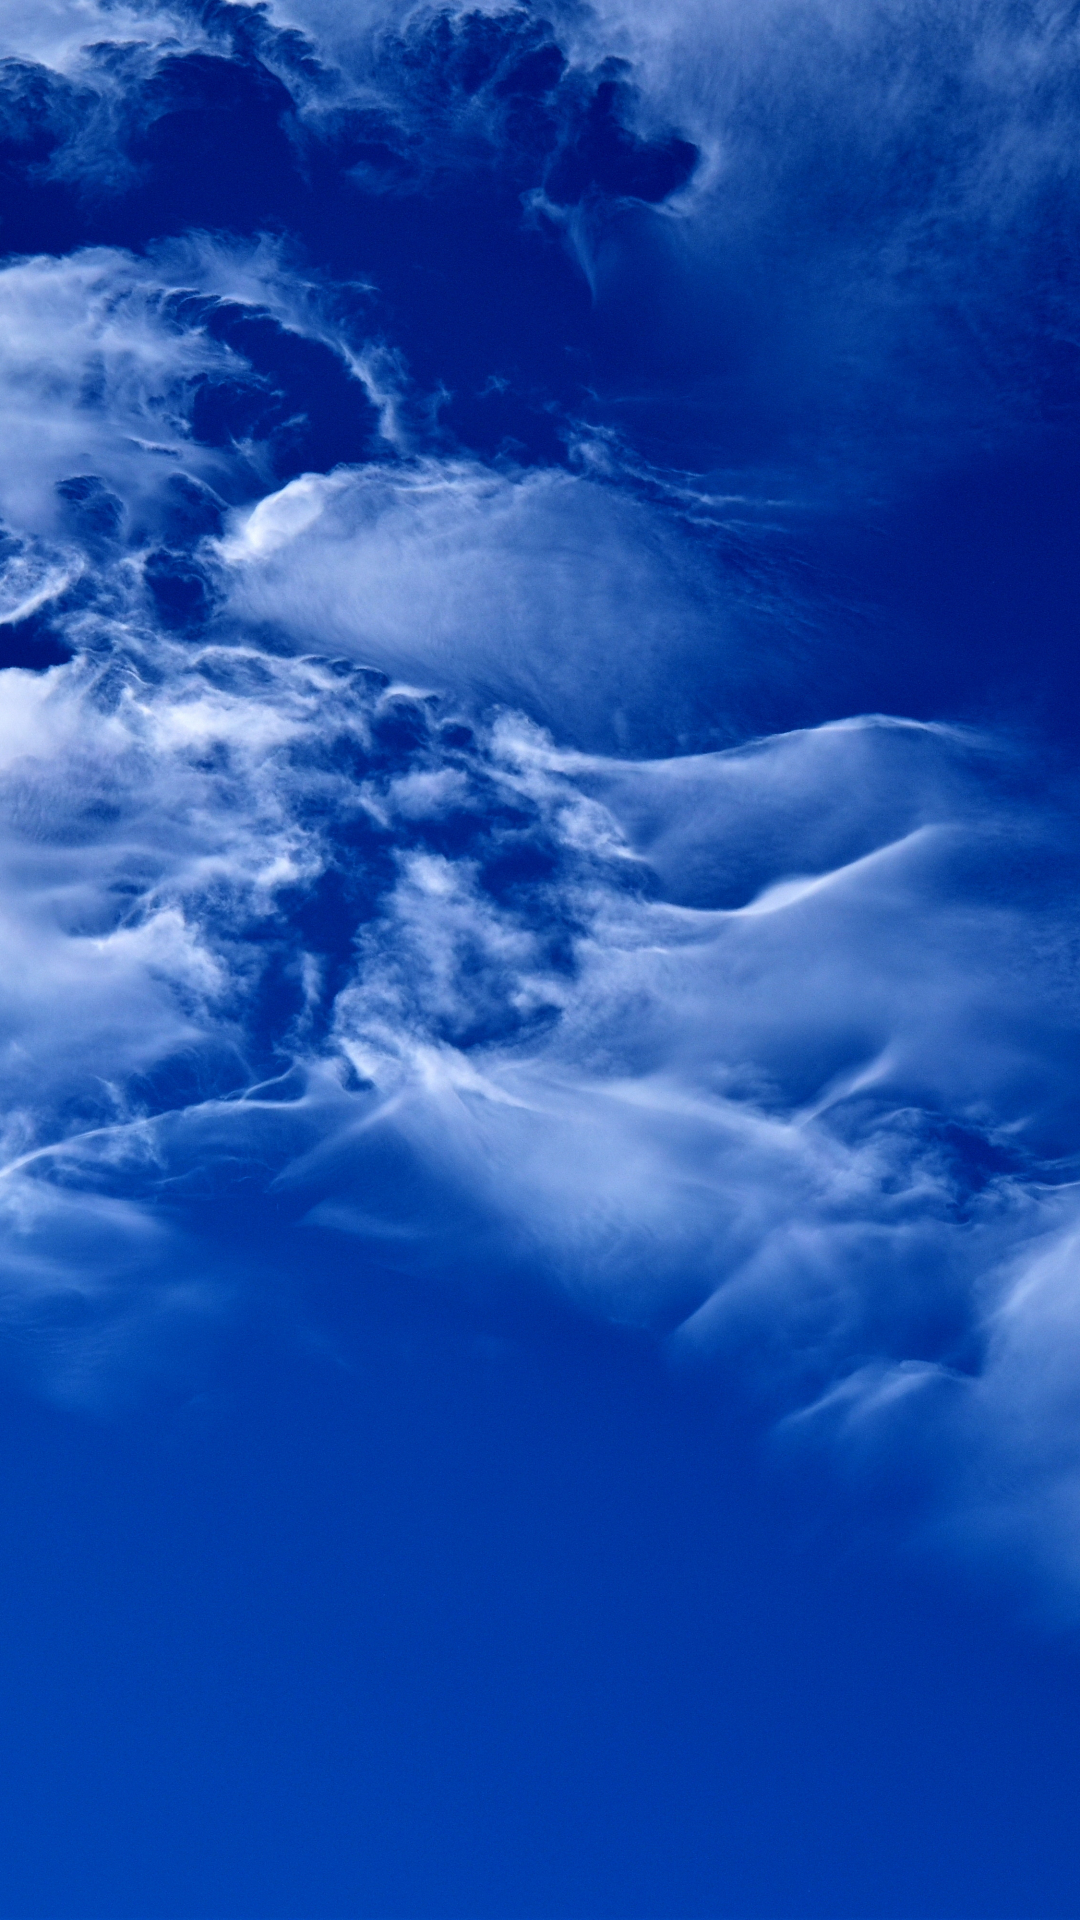 Clouds On A Bright Blue Sky Iphone Wallpaper - Bright Blue Sky - HD Wallpaper 